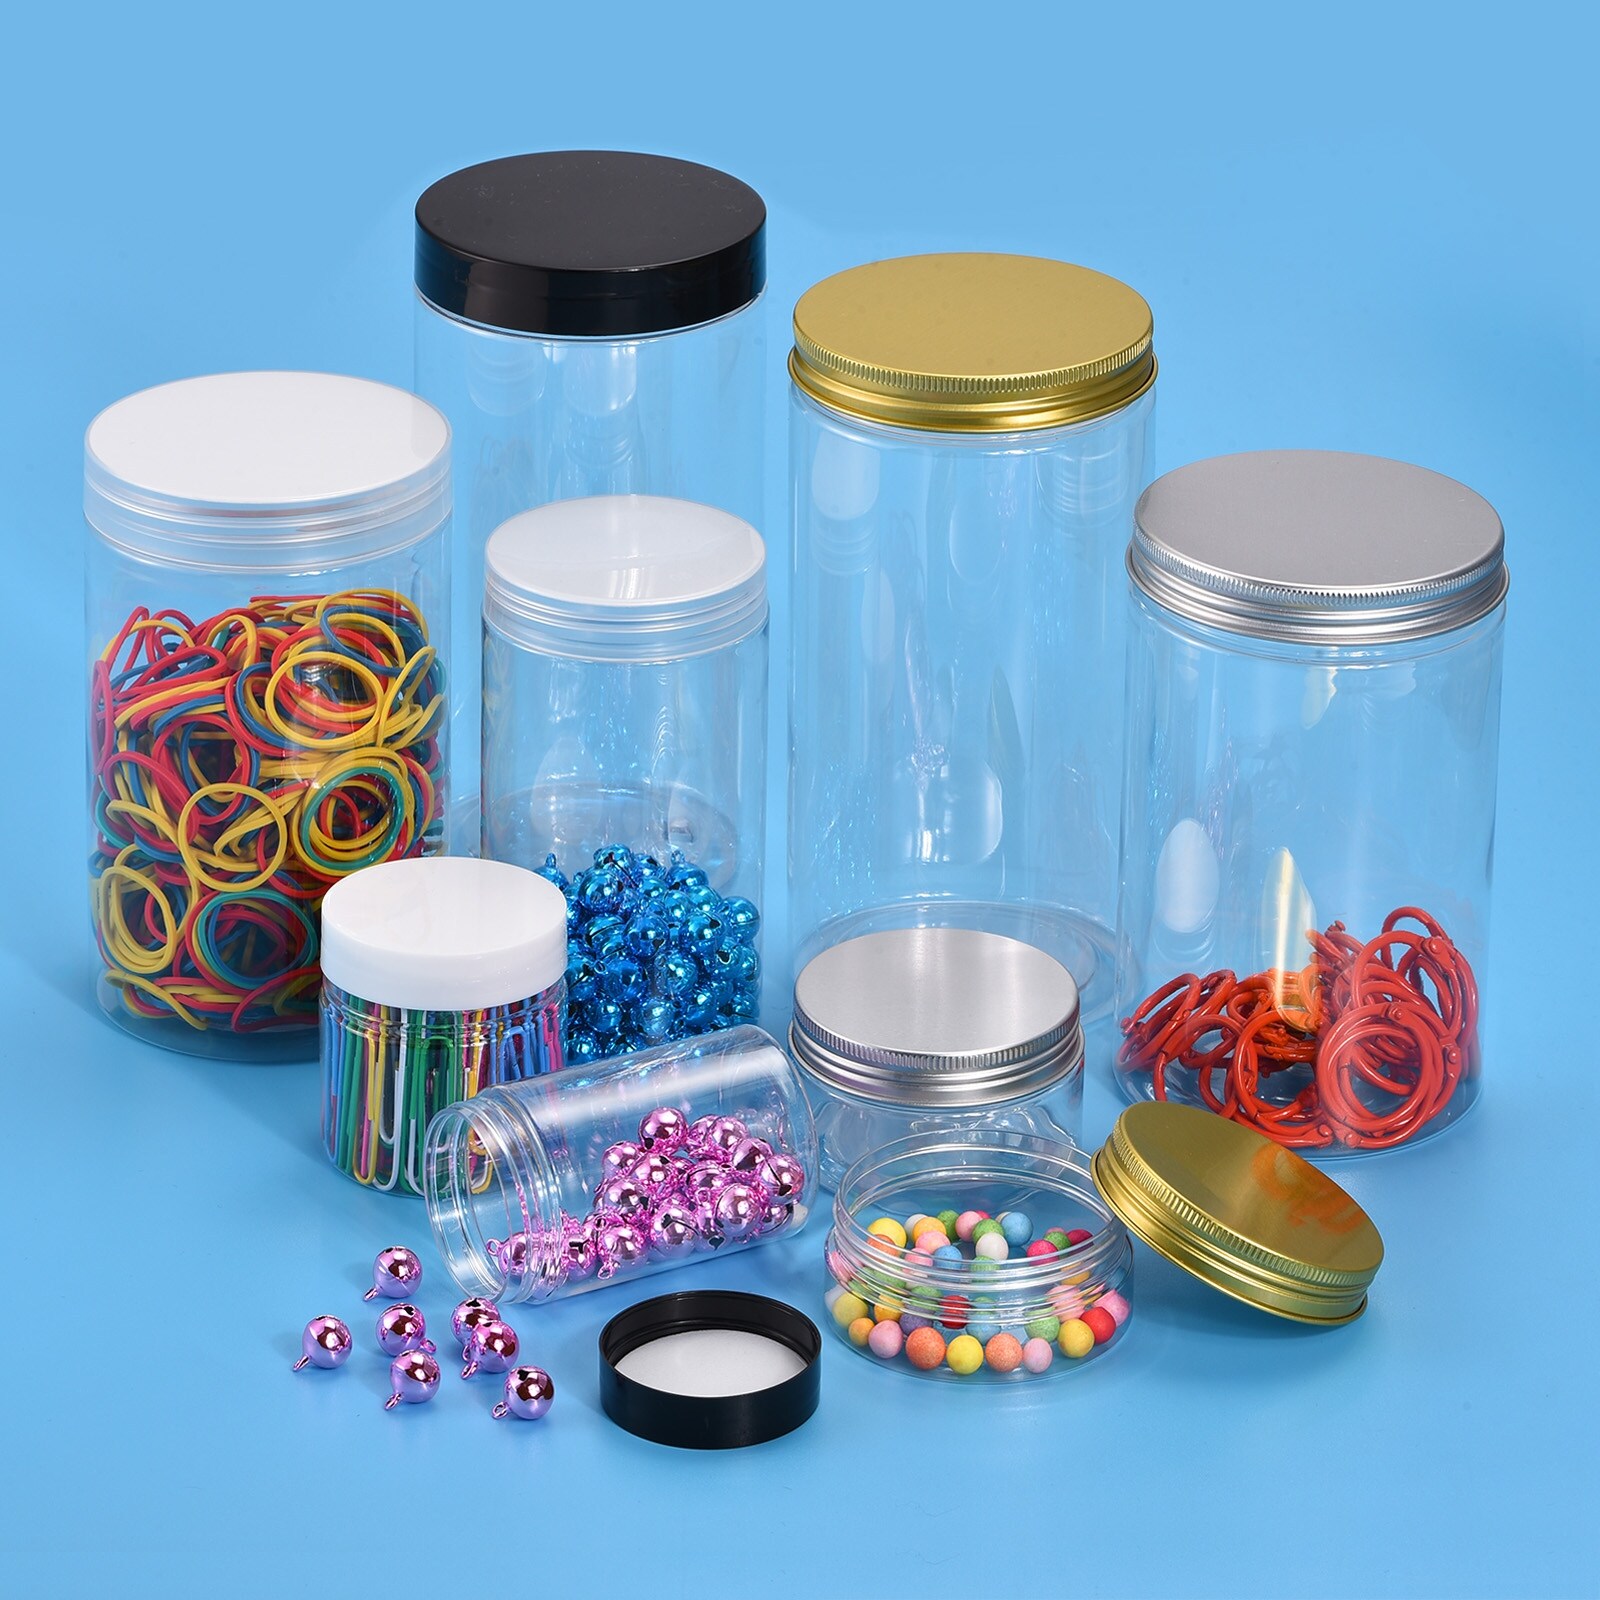 https://ak1.ostkcdn.com/images/products/is/images/direct/6796af8daa9b1930e4370bf223e987ca9eaae417/Round-Plastic-Jars-with-Transparent-Screw-Top-Lid%2C-2Pcs.jpg